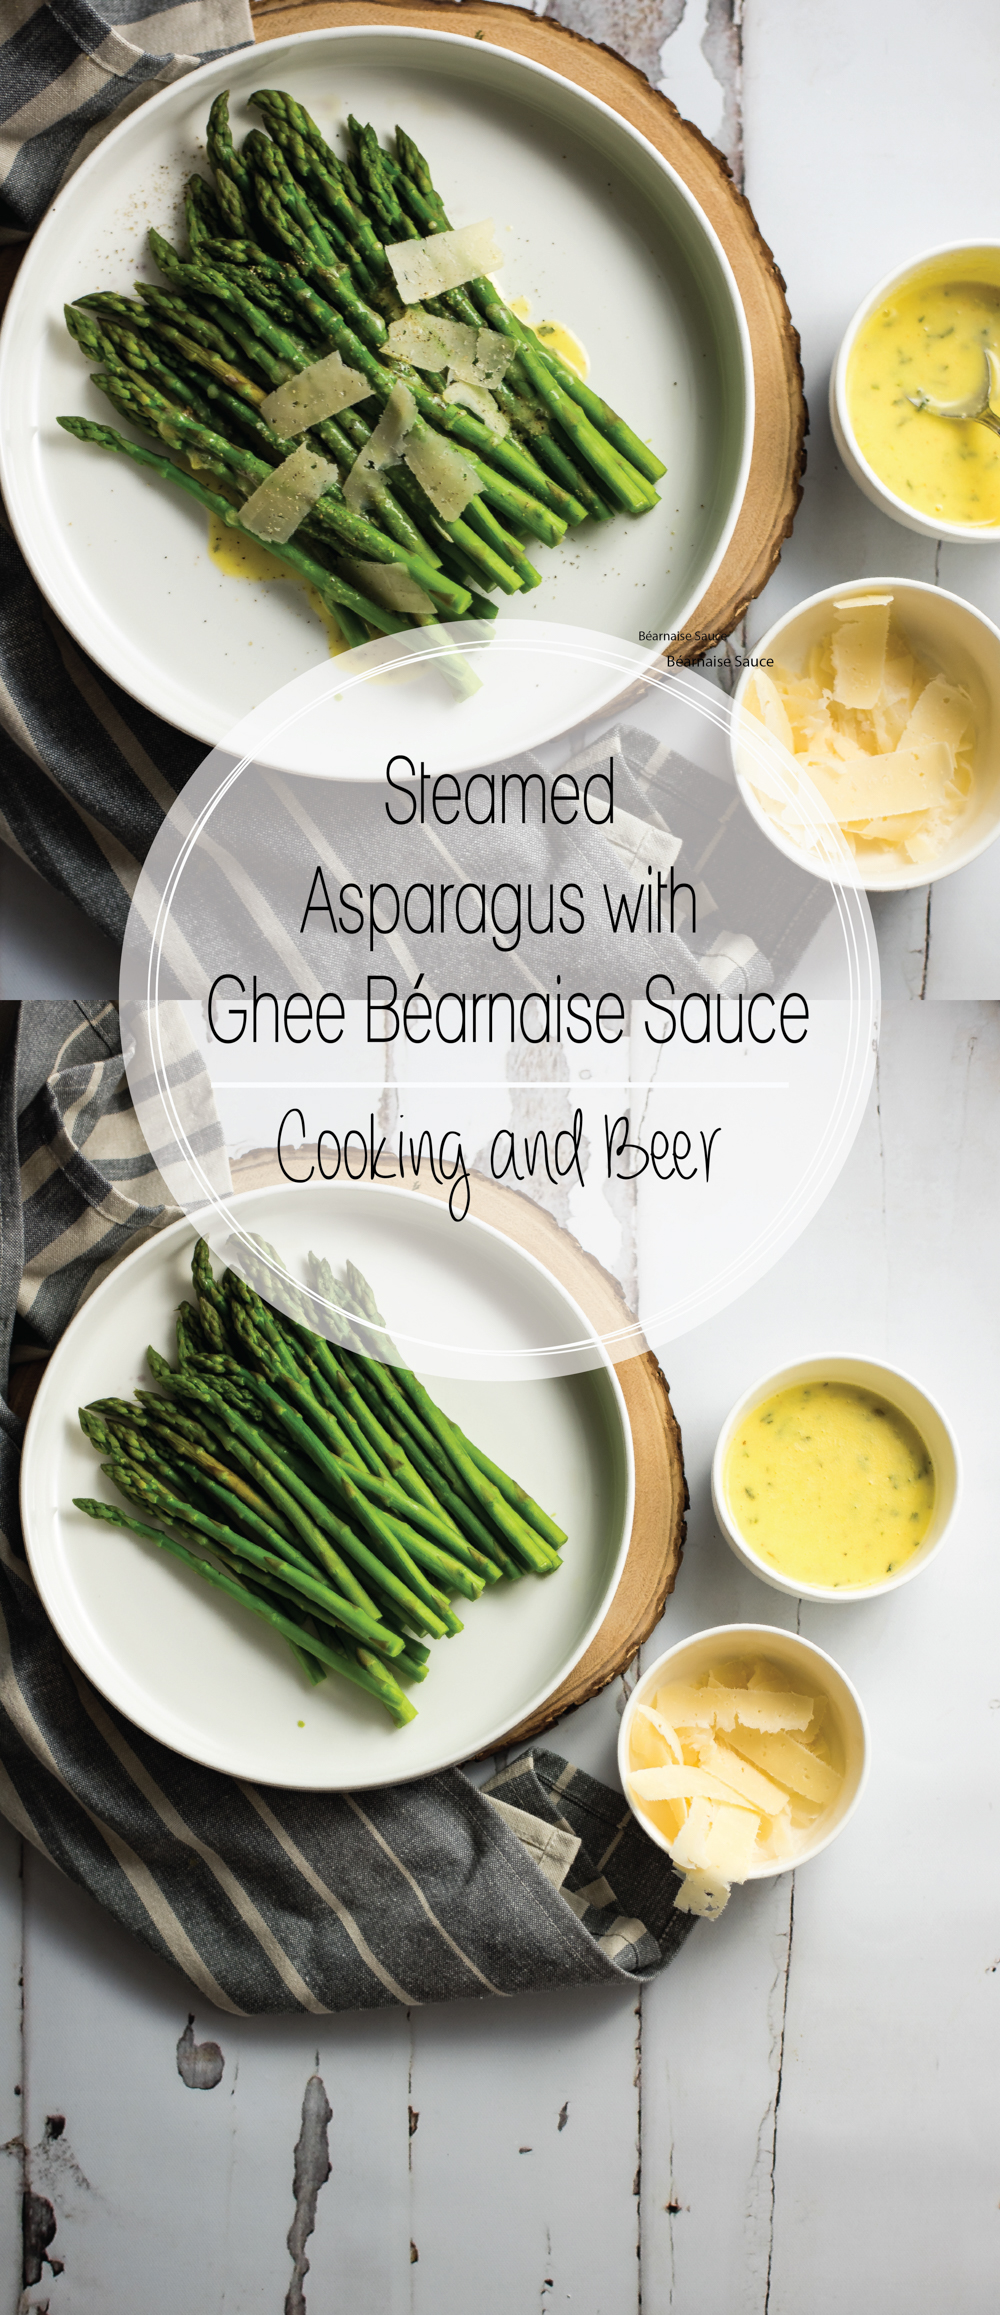 Steamed Asparagus with Ghee Béarnaise Sauce is the perfect side dish for Sunday dinner, especially Easter Sunday dinner! It's super simple and delicious!